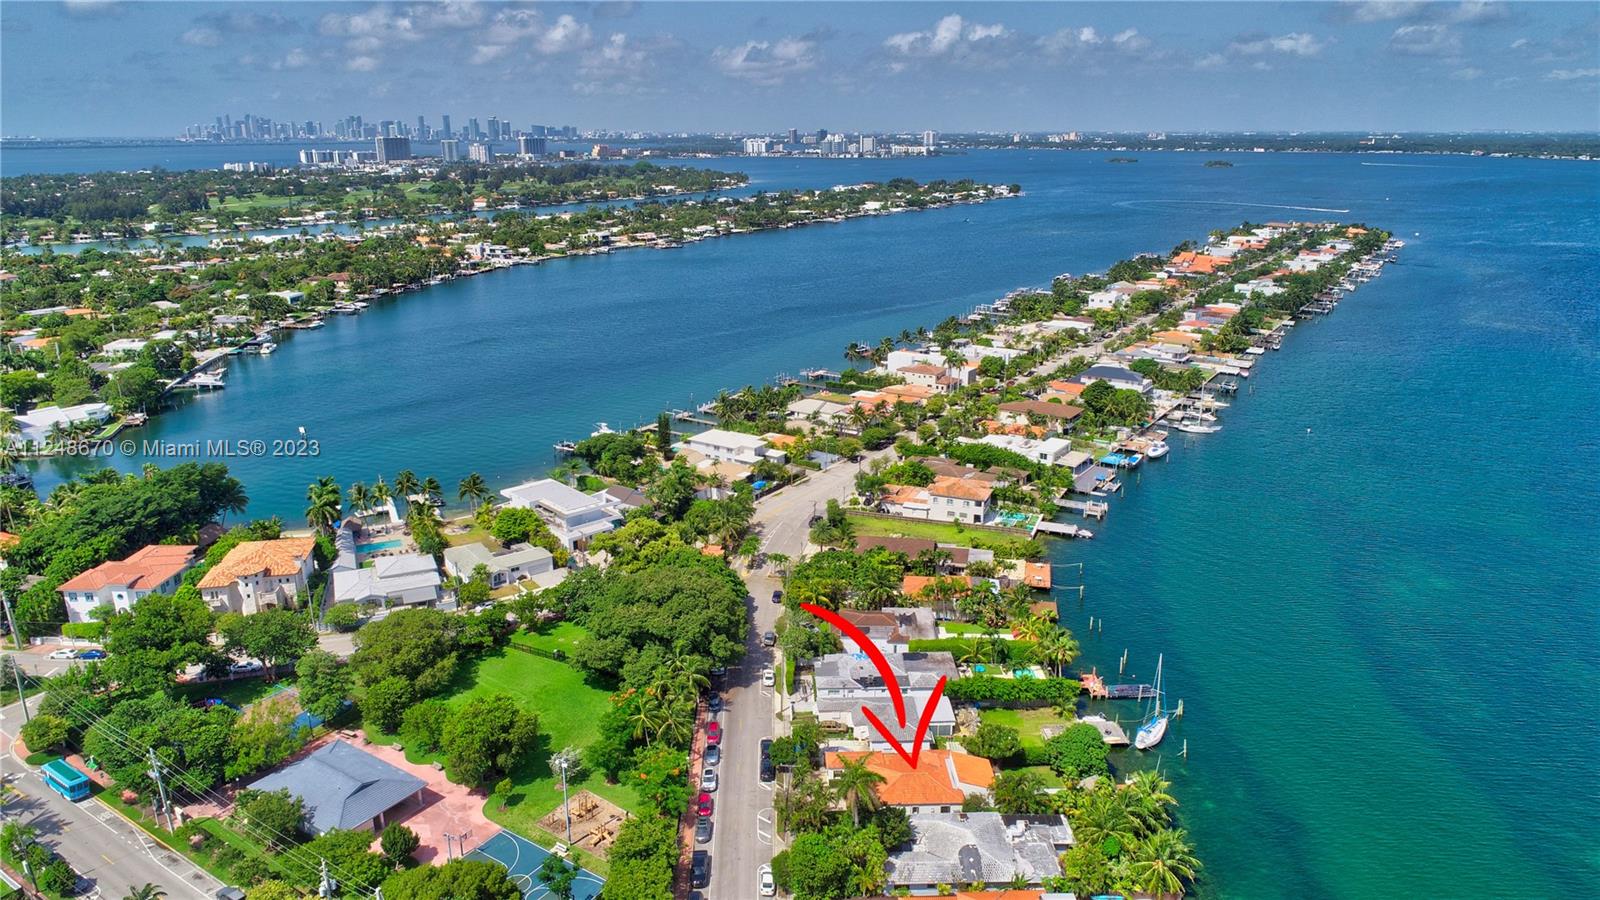 Located in one of the most coveted neighborhoods of Miami Beach. 925 Stillwater Dr. has an incredible view of the sunset directly over the water. The view is directed towards the spectacular Indian Creek Island, where multiple celebrities have mega mansions. Besides the striking view, Stillwater is known for its safe and quiet neighborhood. 

The perfect place to come and relax, either on vacation or after a long day at work. You can literally watch dolphins from your back yard.  Its location is central to both Aventura and Downtown Miami making commute a breeze. This place is the perfect combination of serenity, nature, and beauty.